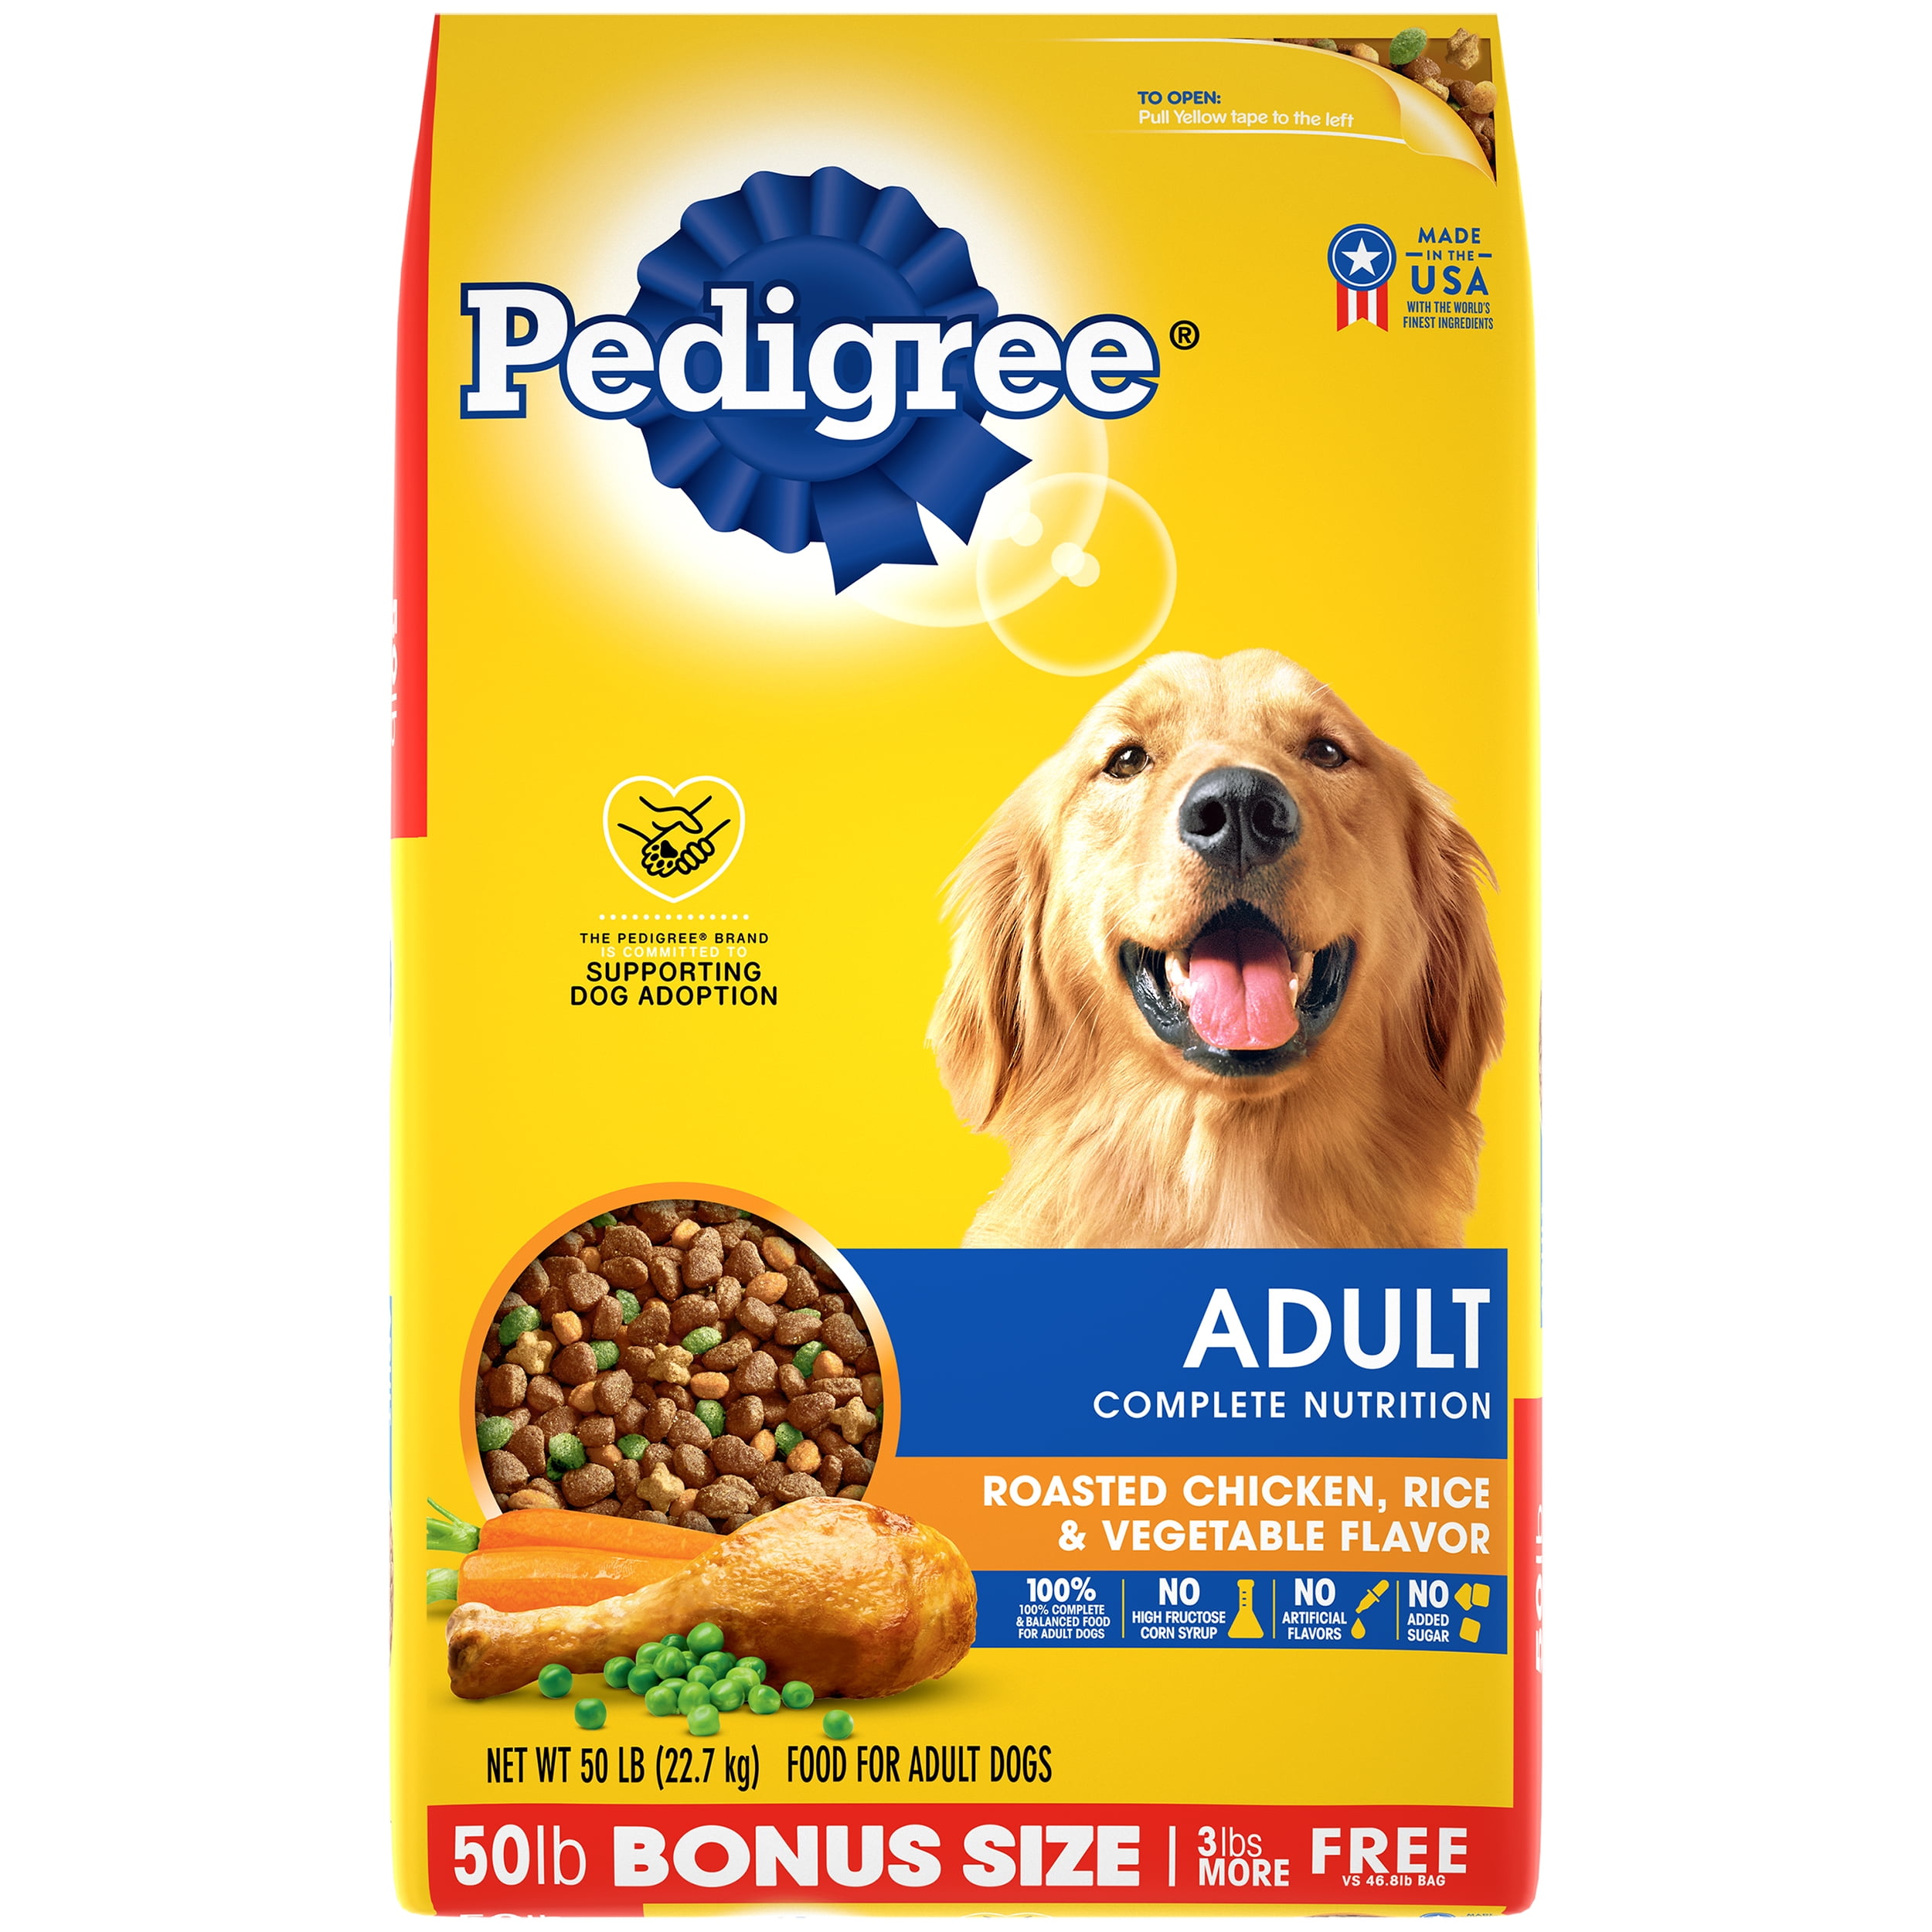 is pedigree puppy food good for my puppy